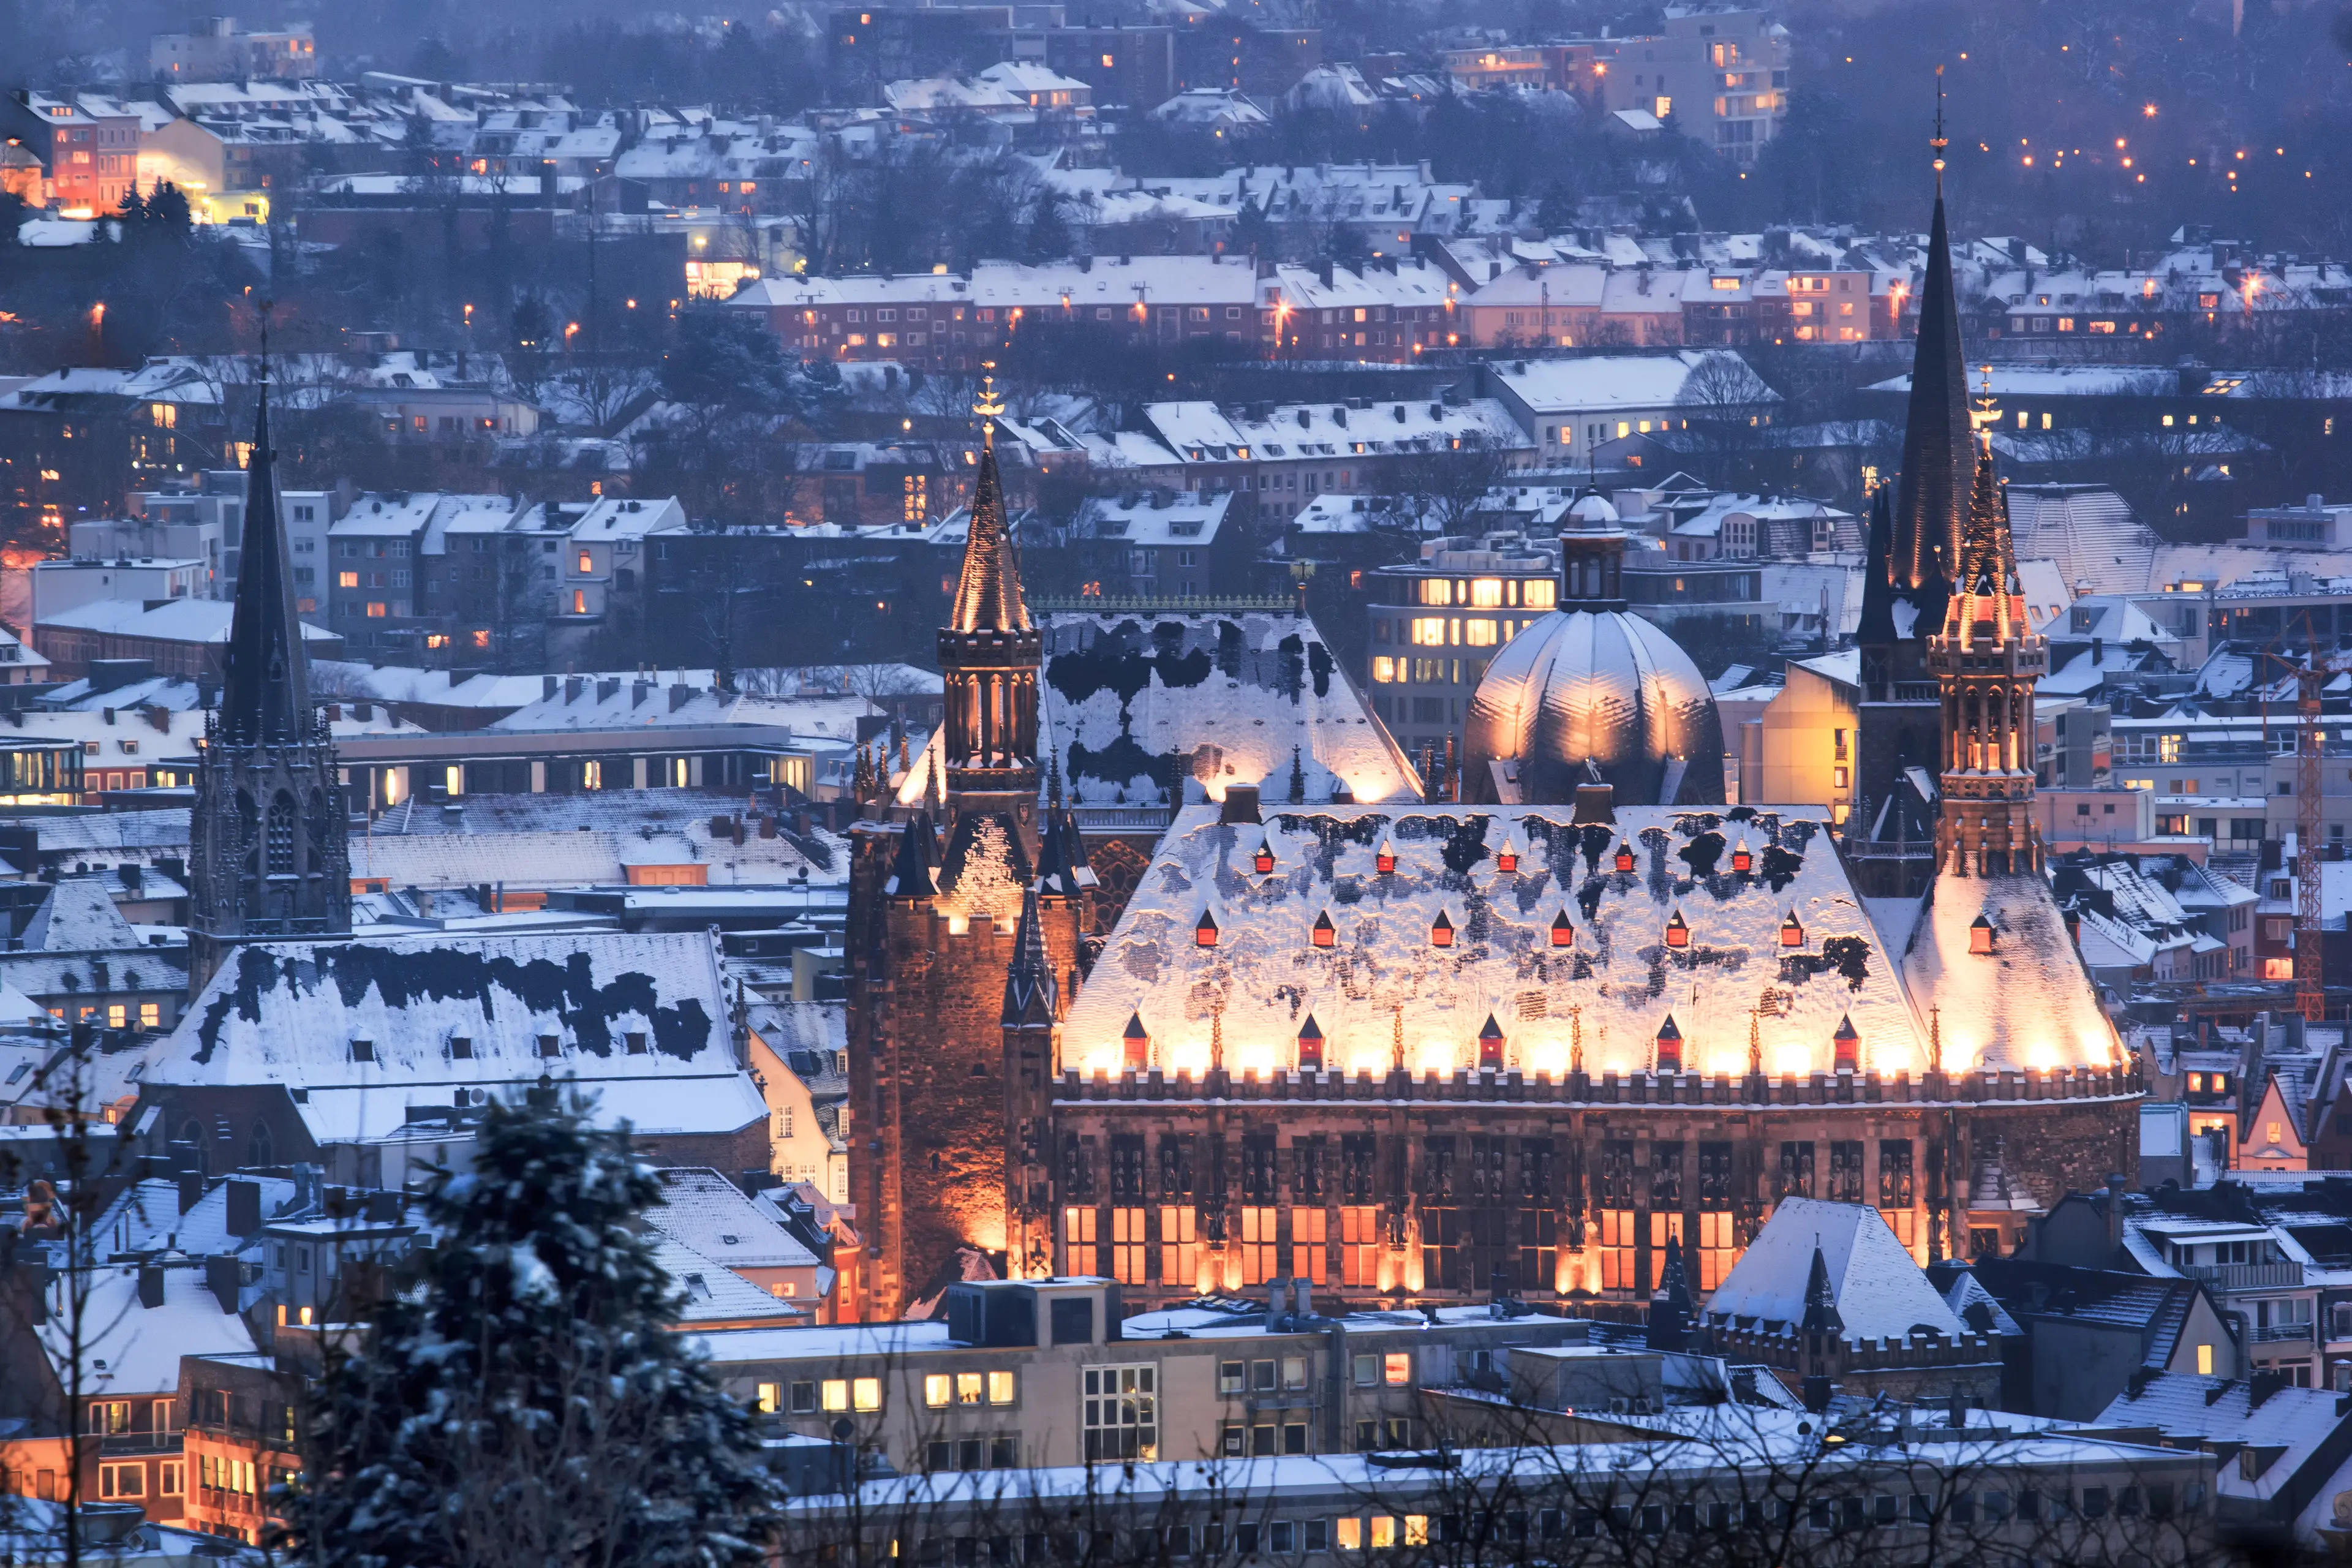 5-Day Christmas Holiday Experience in Aachen, Germany